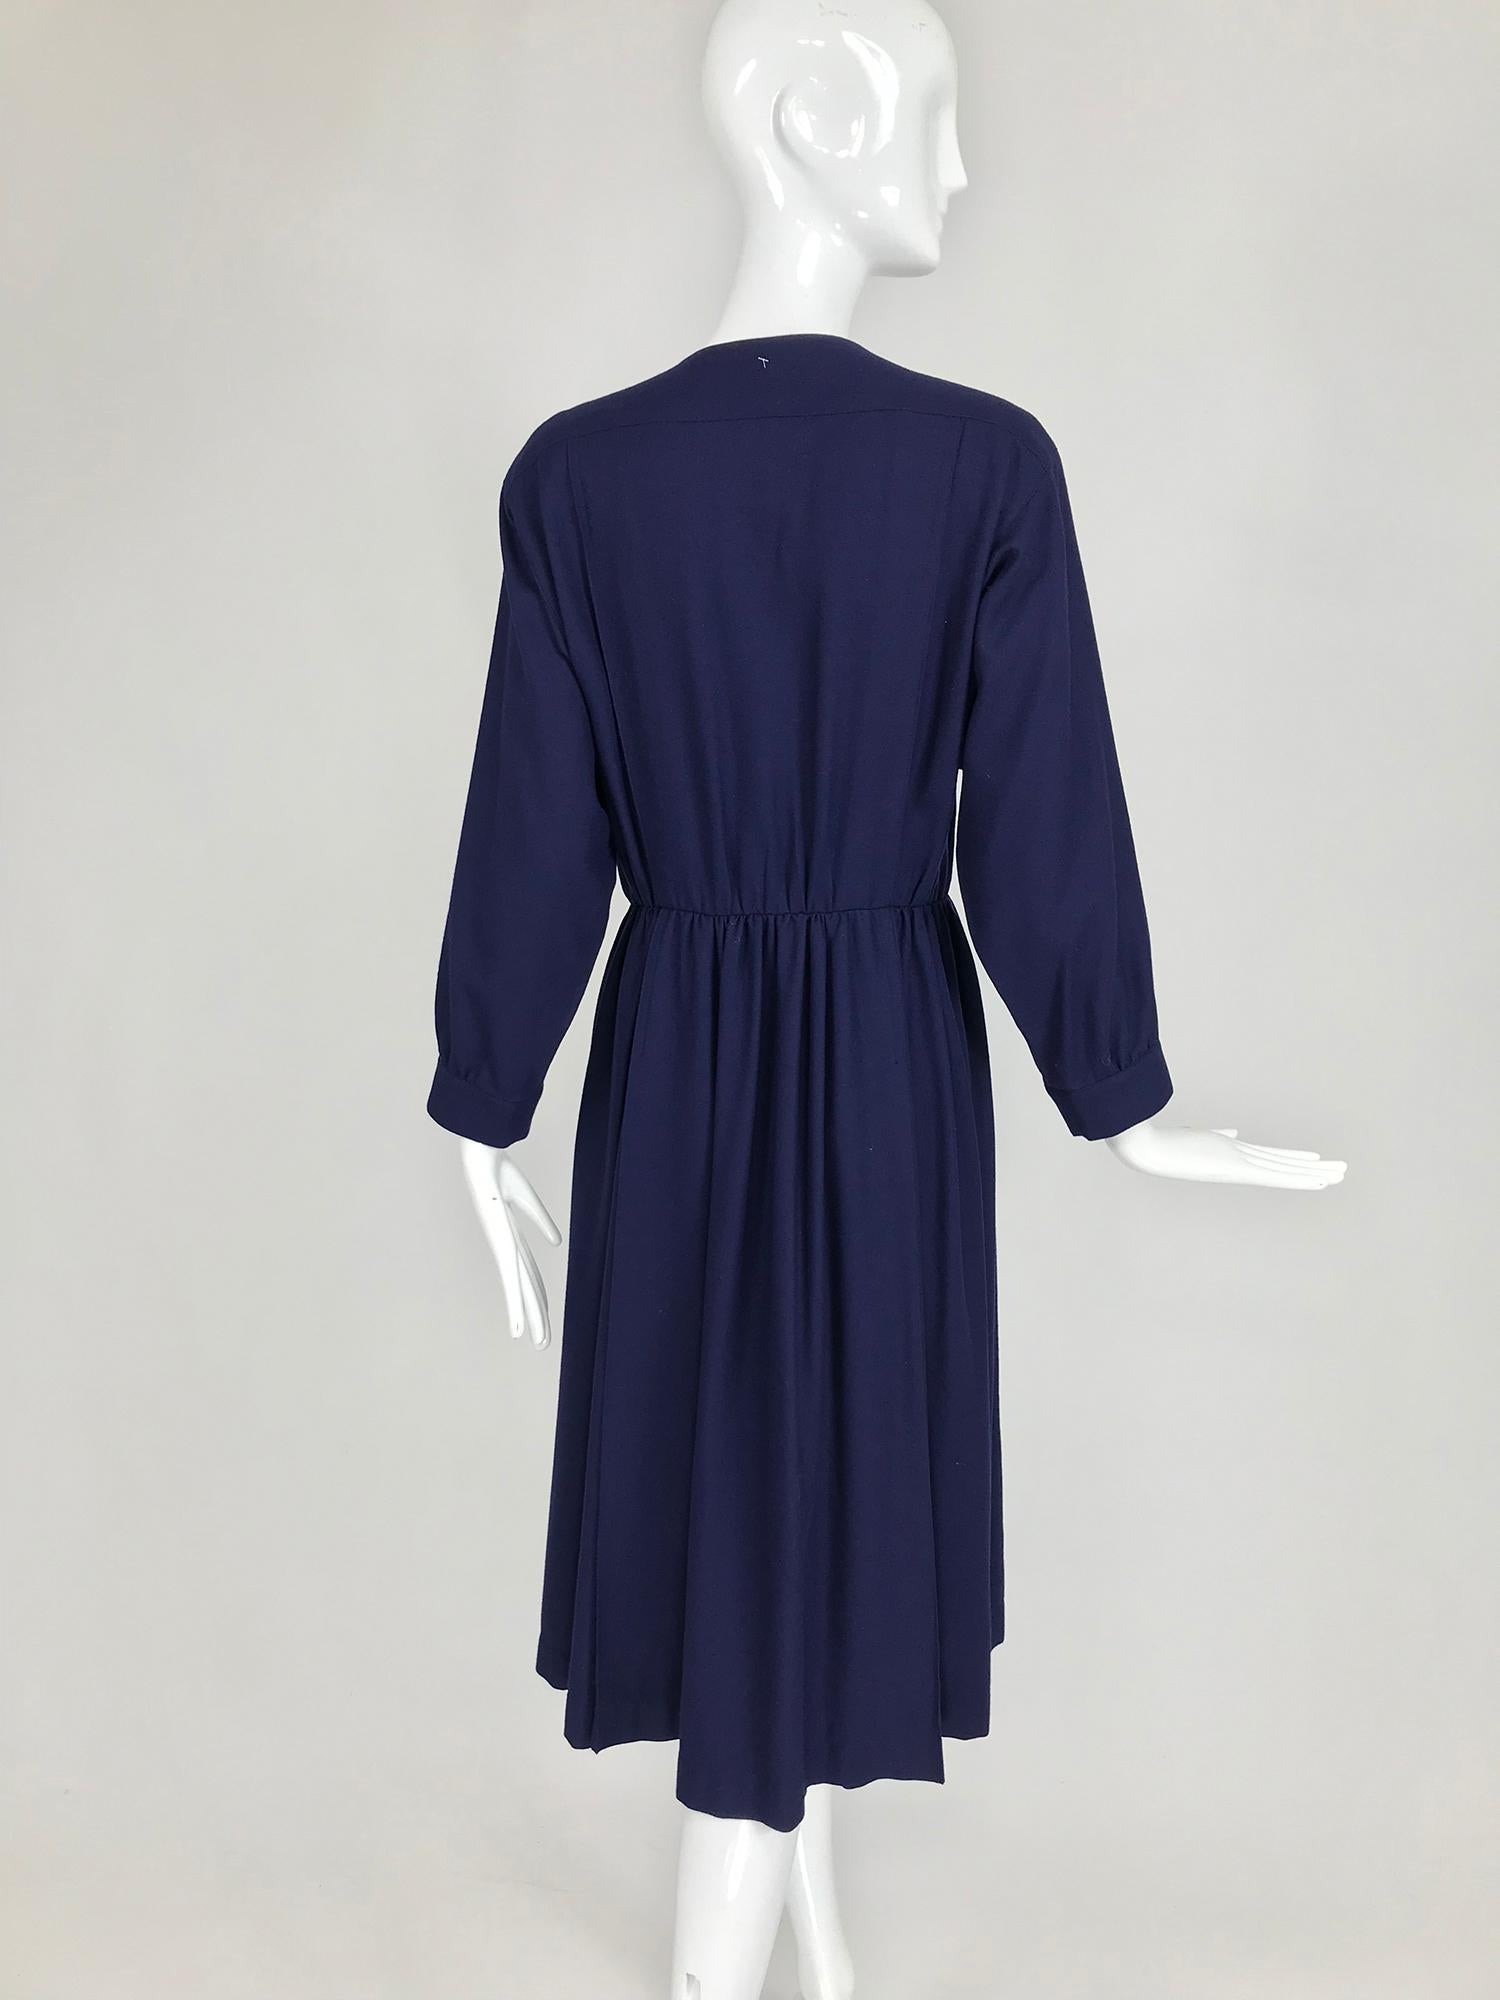 Chloe 1981 Karl Lagerfeld Blue Embroidered Button Front Dress Documented 5